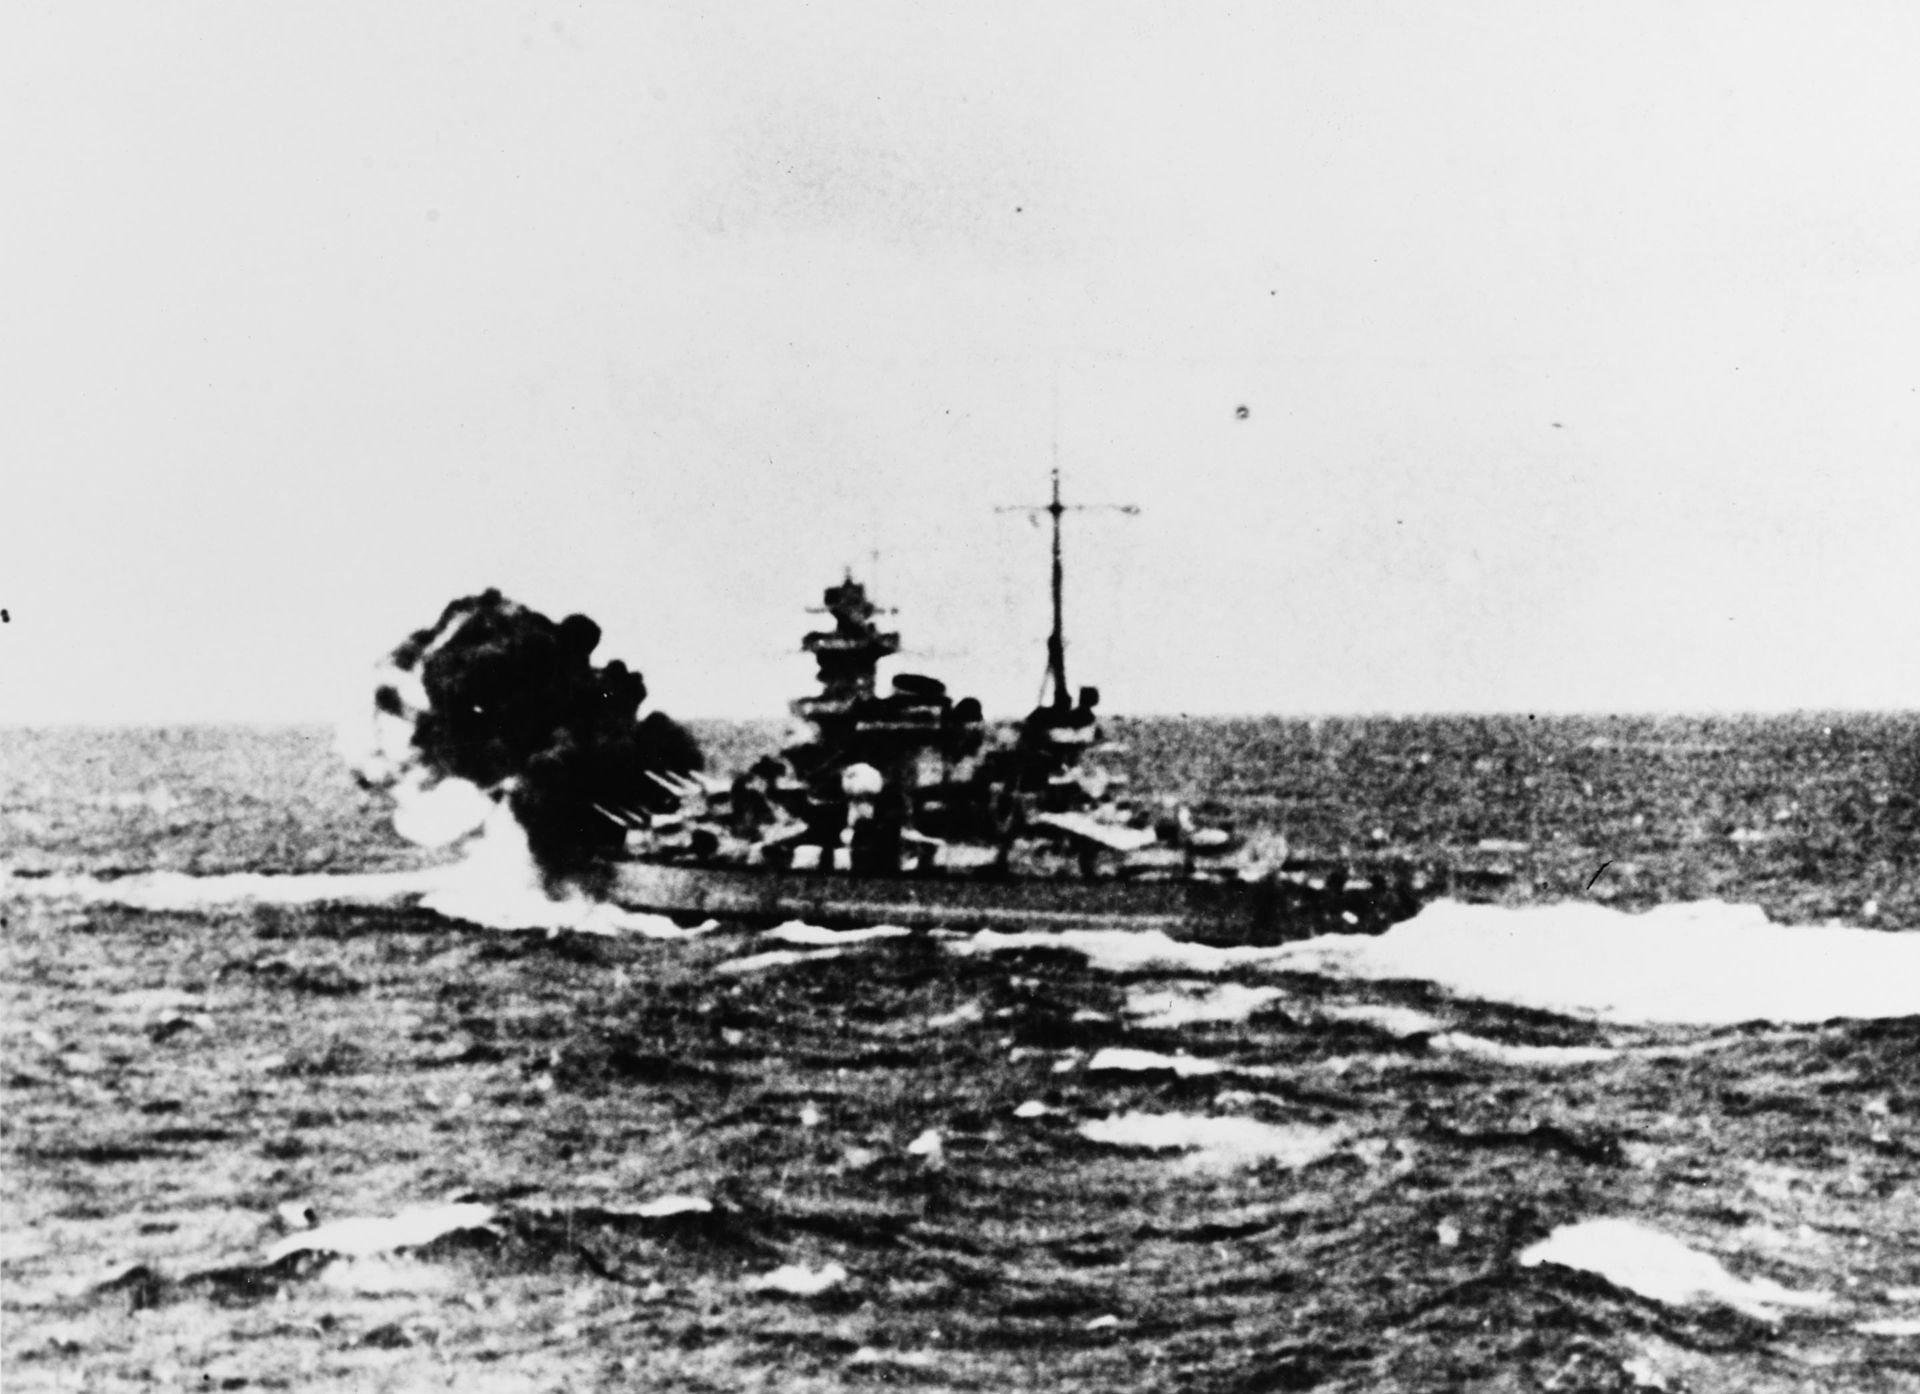 The Death of Scharnhorst – The Battle of the North Cape and the Final Hours of One of Hitler’s Most Dangerous Warships